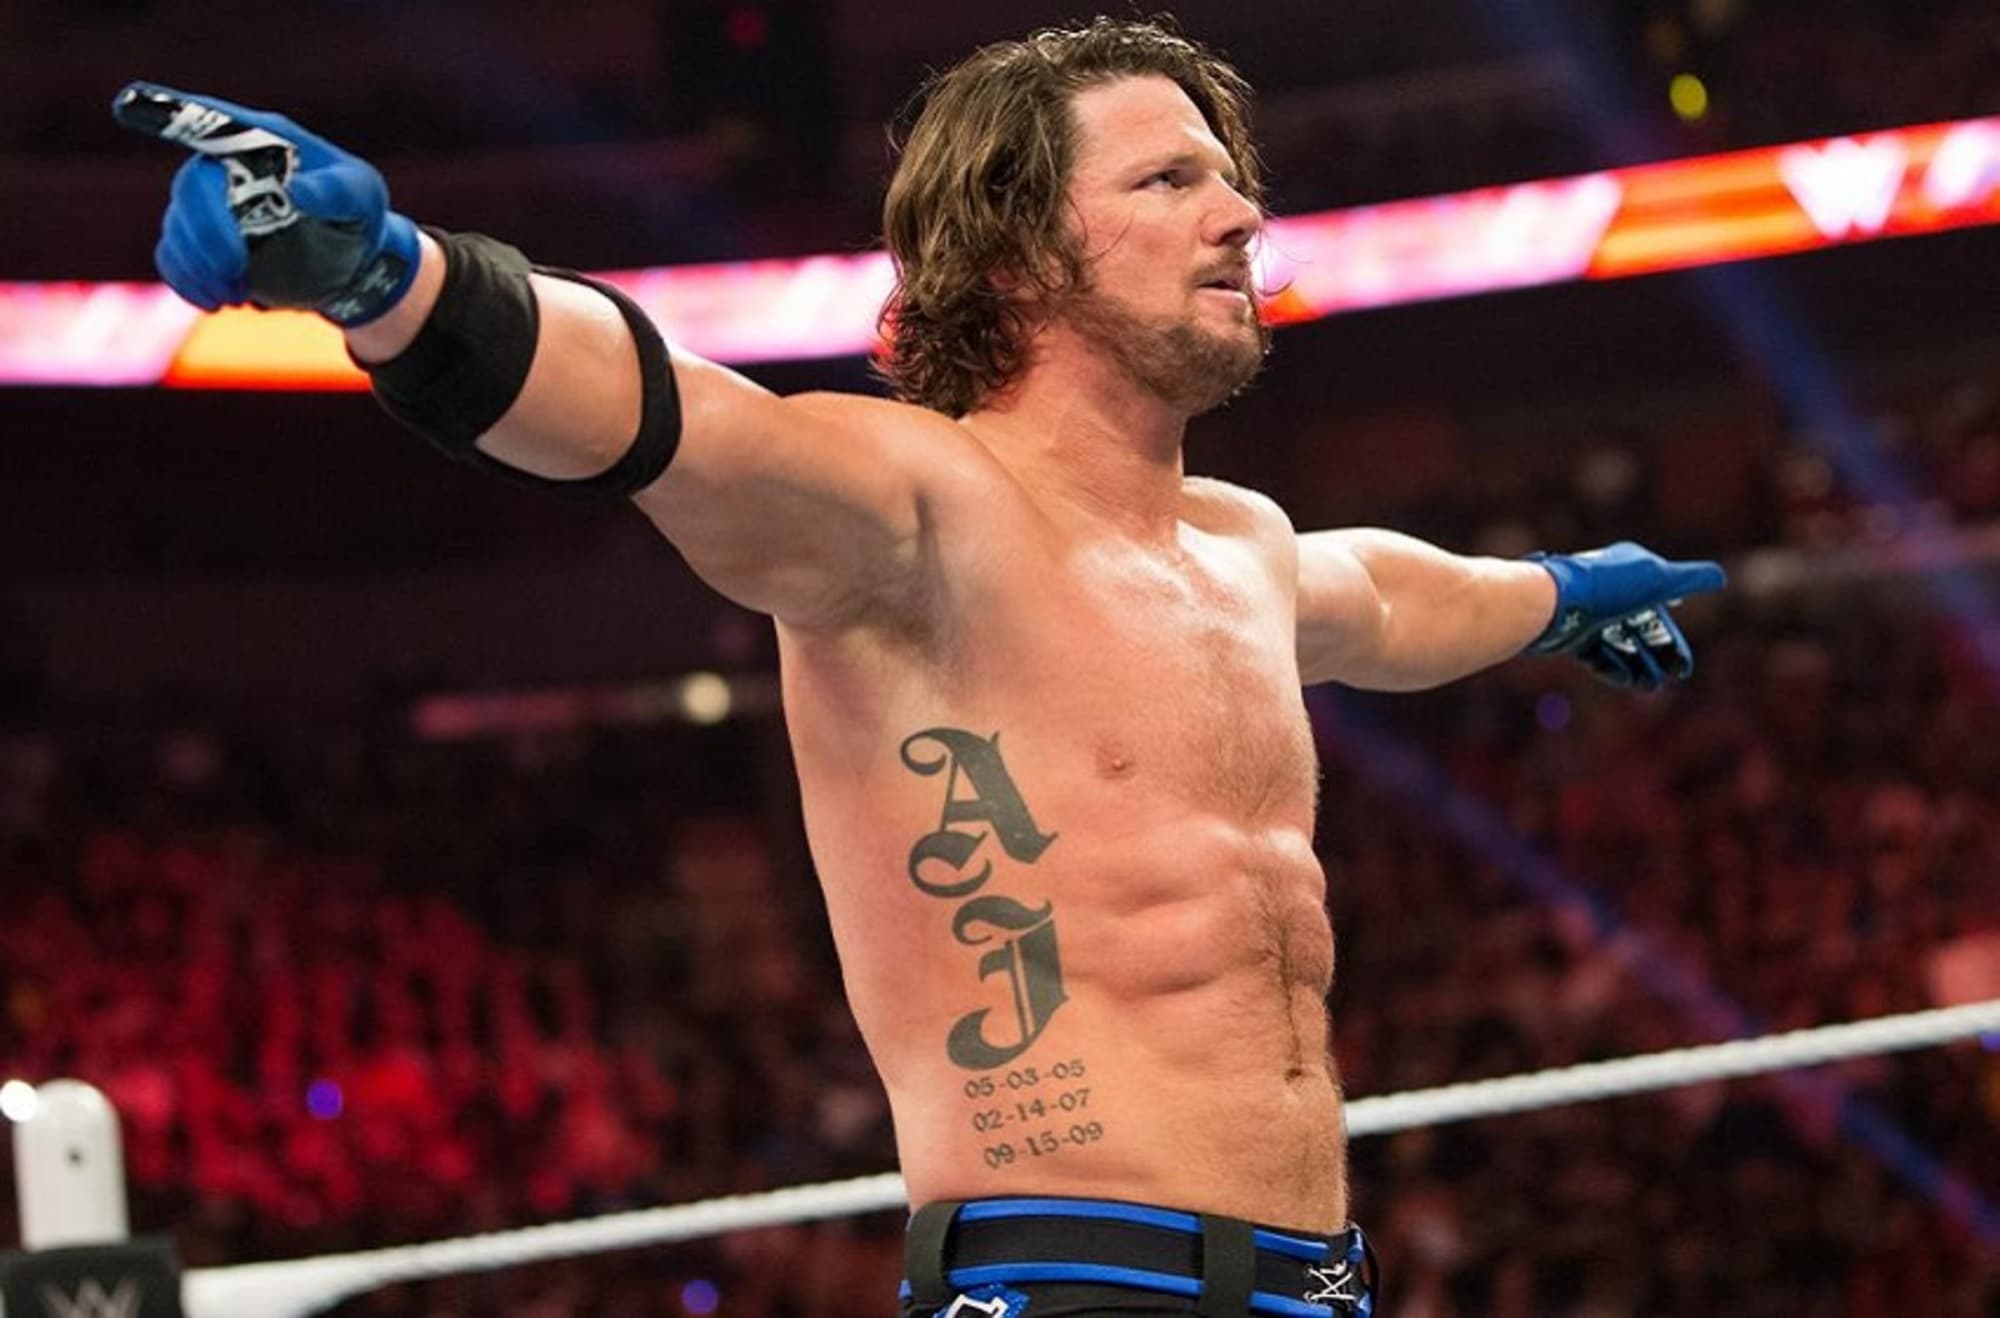 2016 The year of AJ Styles in WWE